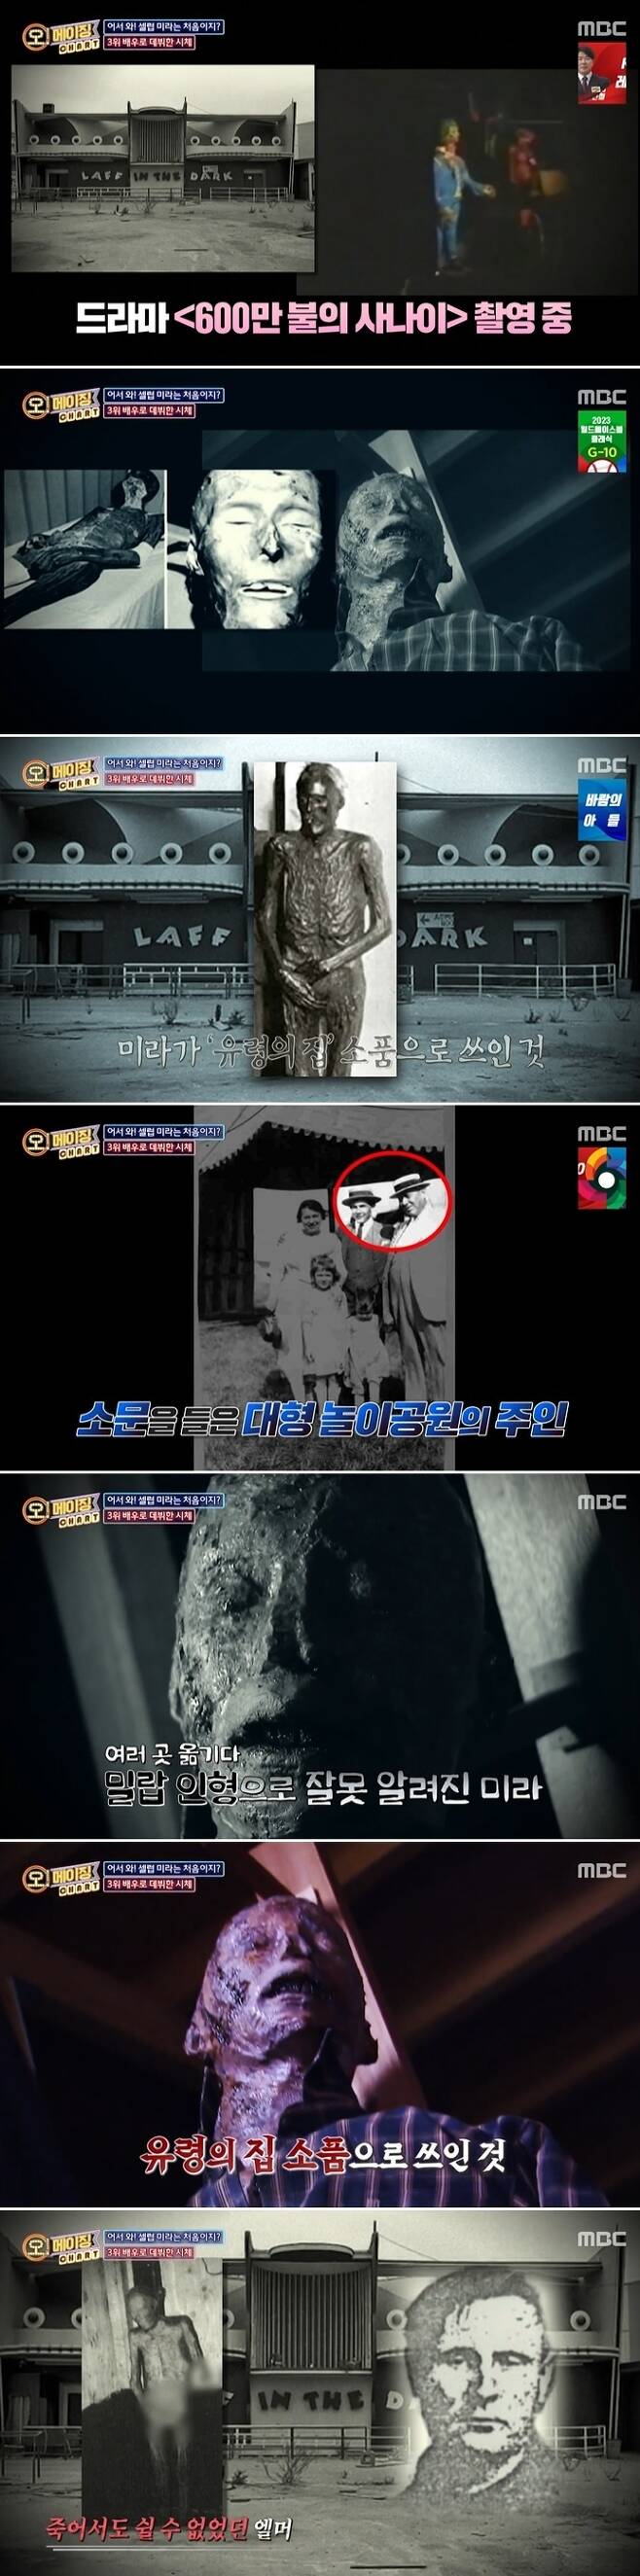 Is there a dead body that debuted as an actor?MBC Mysterious TV Surprise broadcast on February 26 highlighted what happened during the filming of Drama The Man of Six Million Dollars in 1976.At the time, The Six Million Dollar Man was filming at the Phantoms house, and it was shocked to discover that what he thought was a small mannequin was a real human body. The mummy was used as a props for the Phantoms house.Investigations revealed the body to be the famous World Bank Strength of the 1900s: shot dead by a sheriff, but embalmed and displayed by an undertaker to make money.